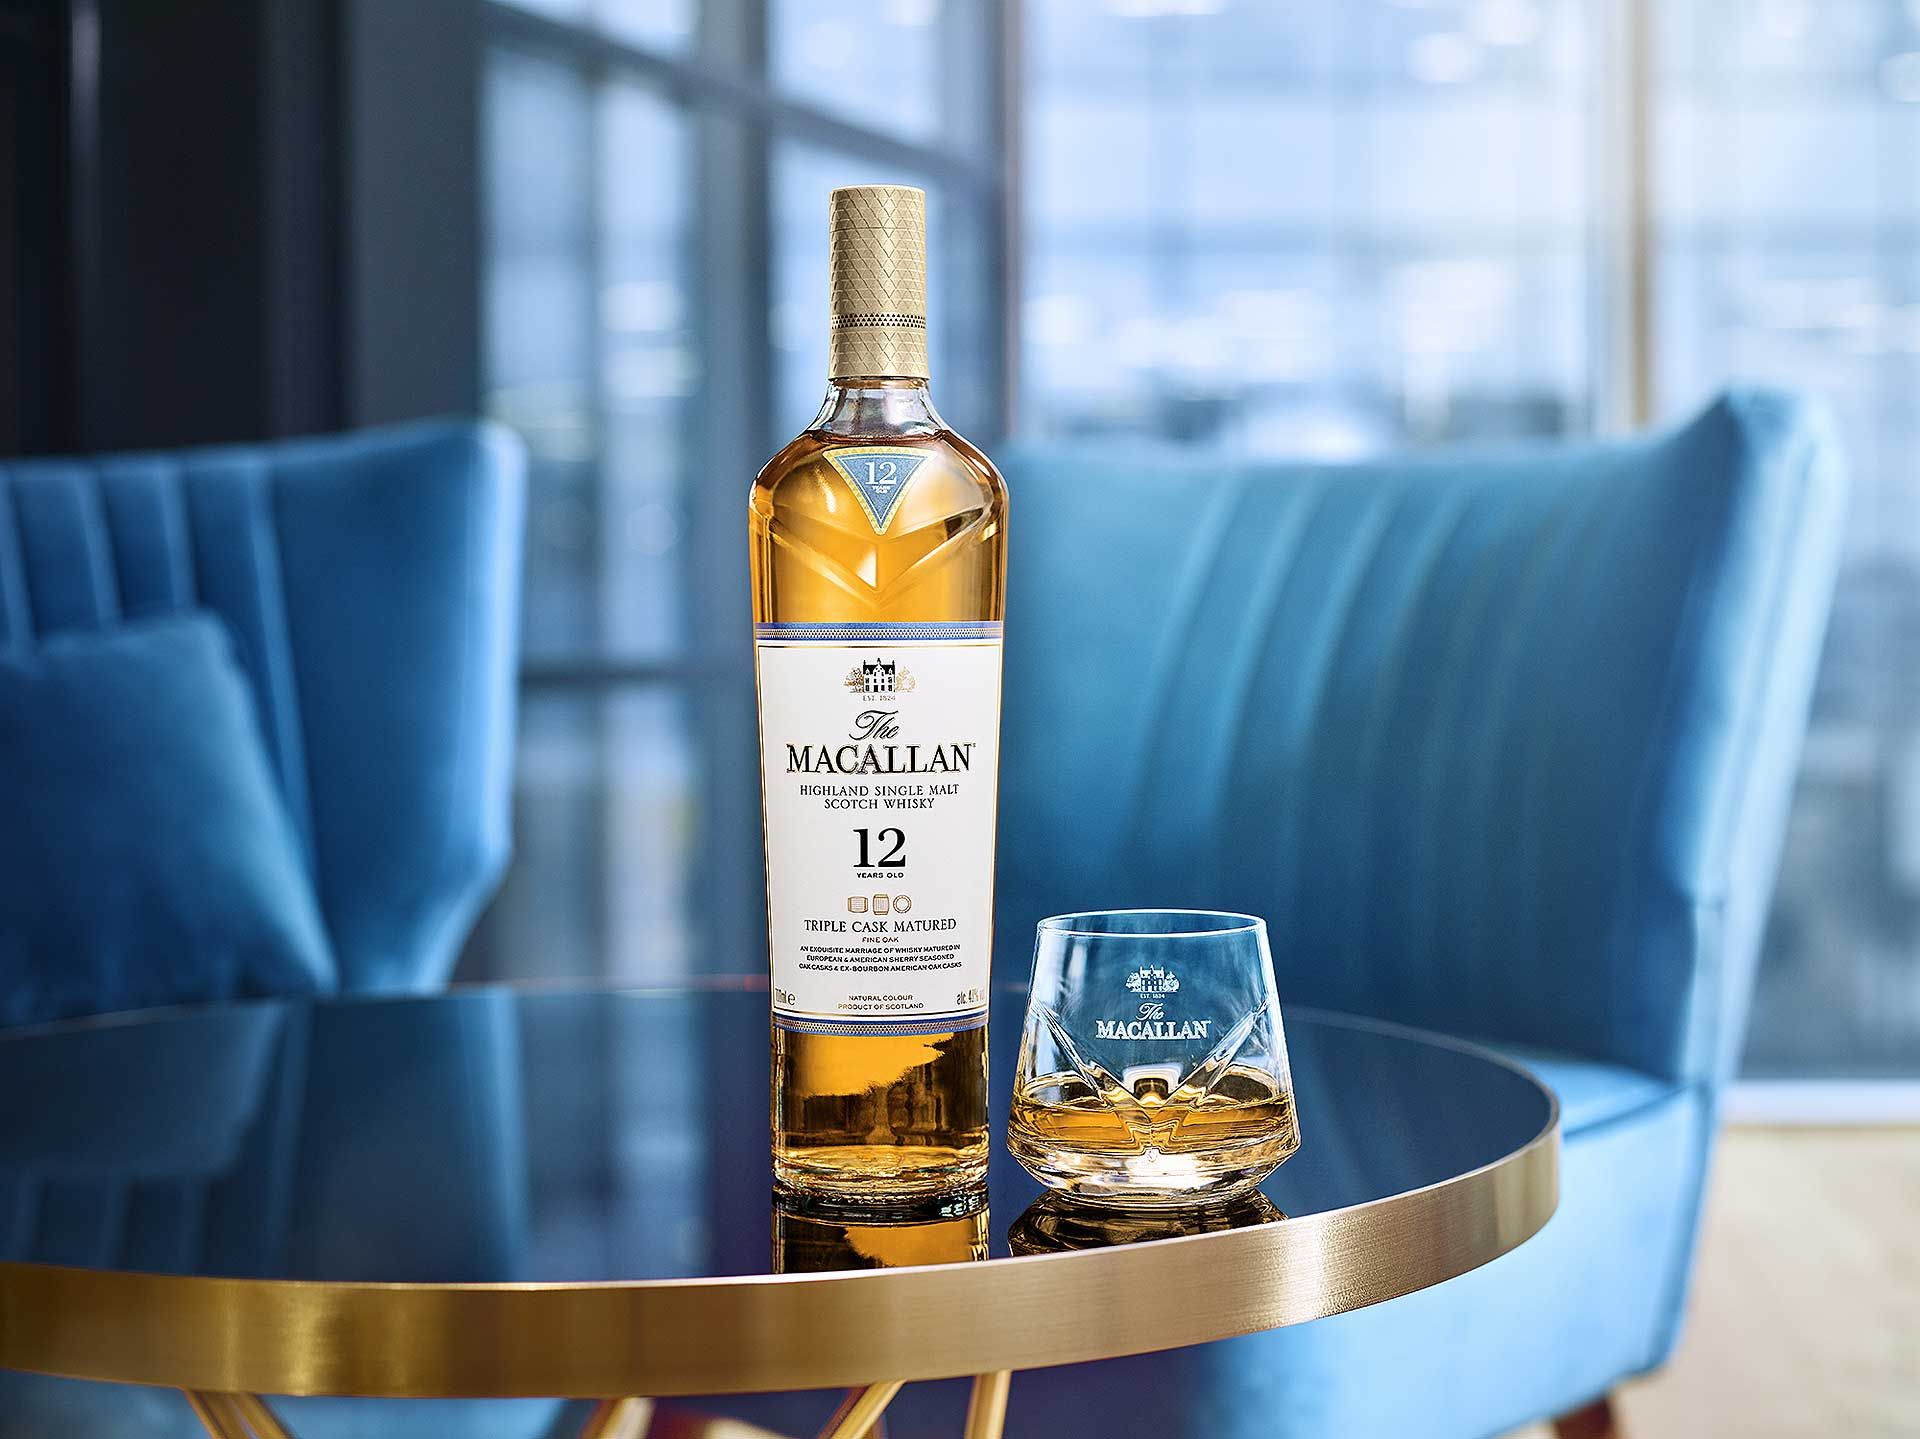 The Macallan Updates Its Whisky Bottle Design With A New Dapper